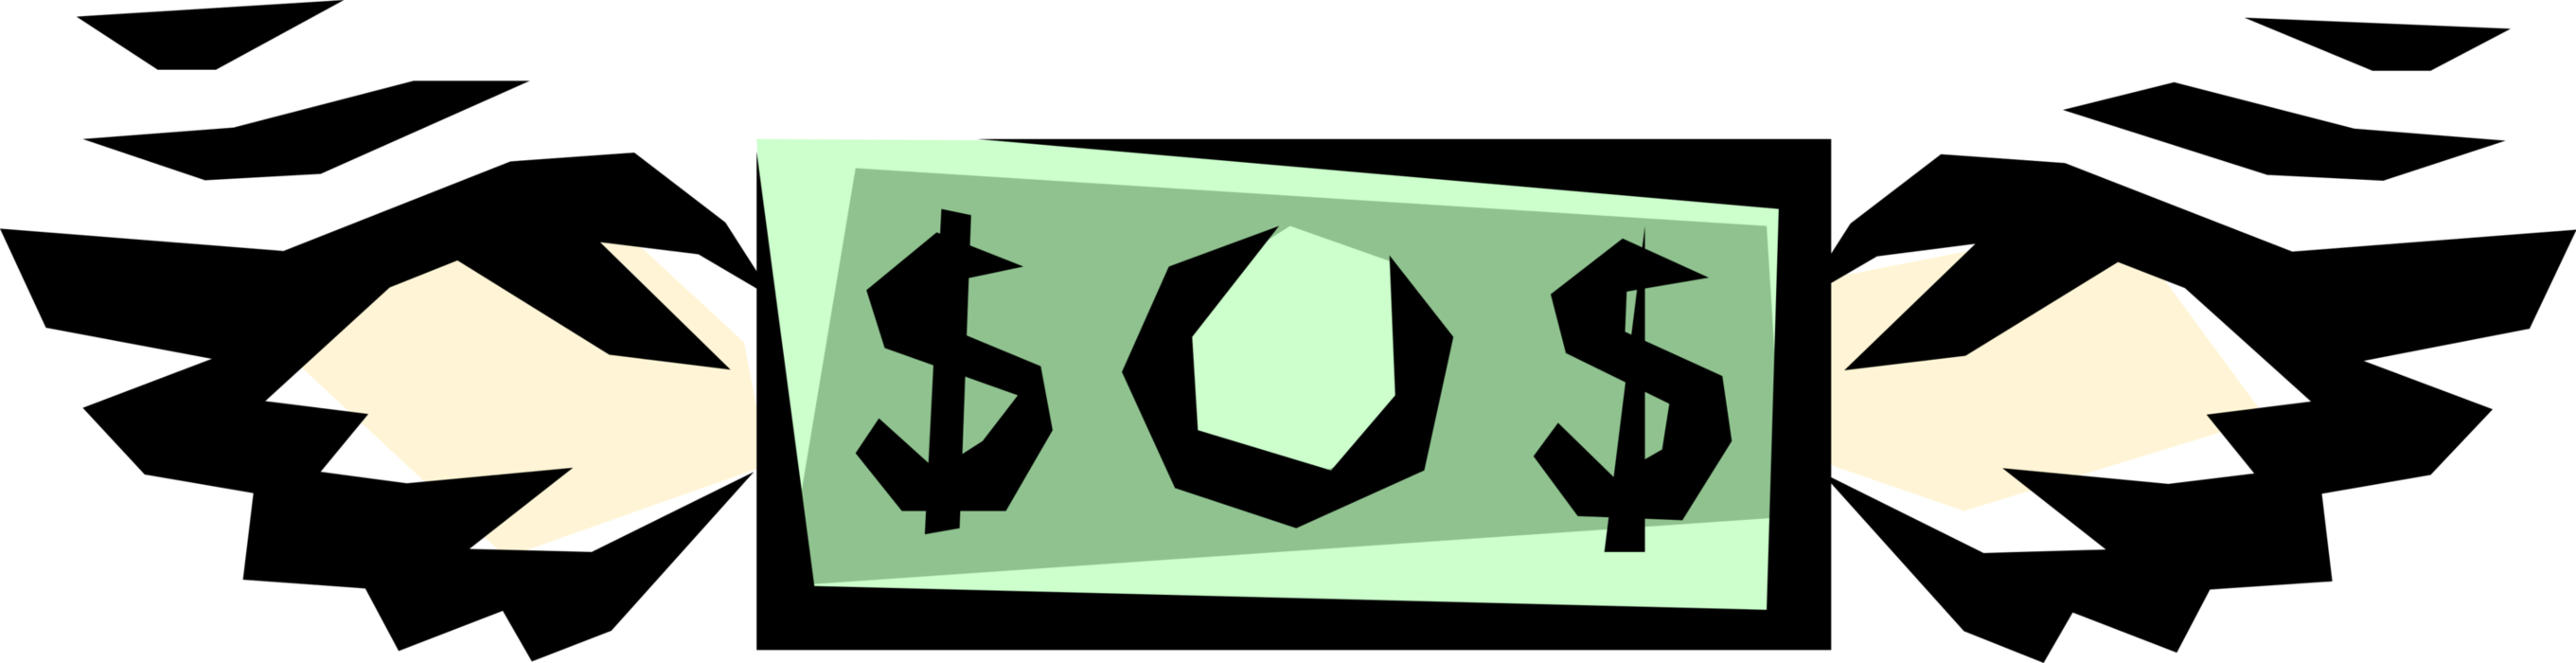 Vector Illustration of Flying Dollar Paper Money Monetary Currency of the United States